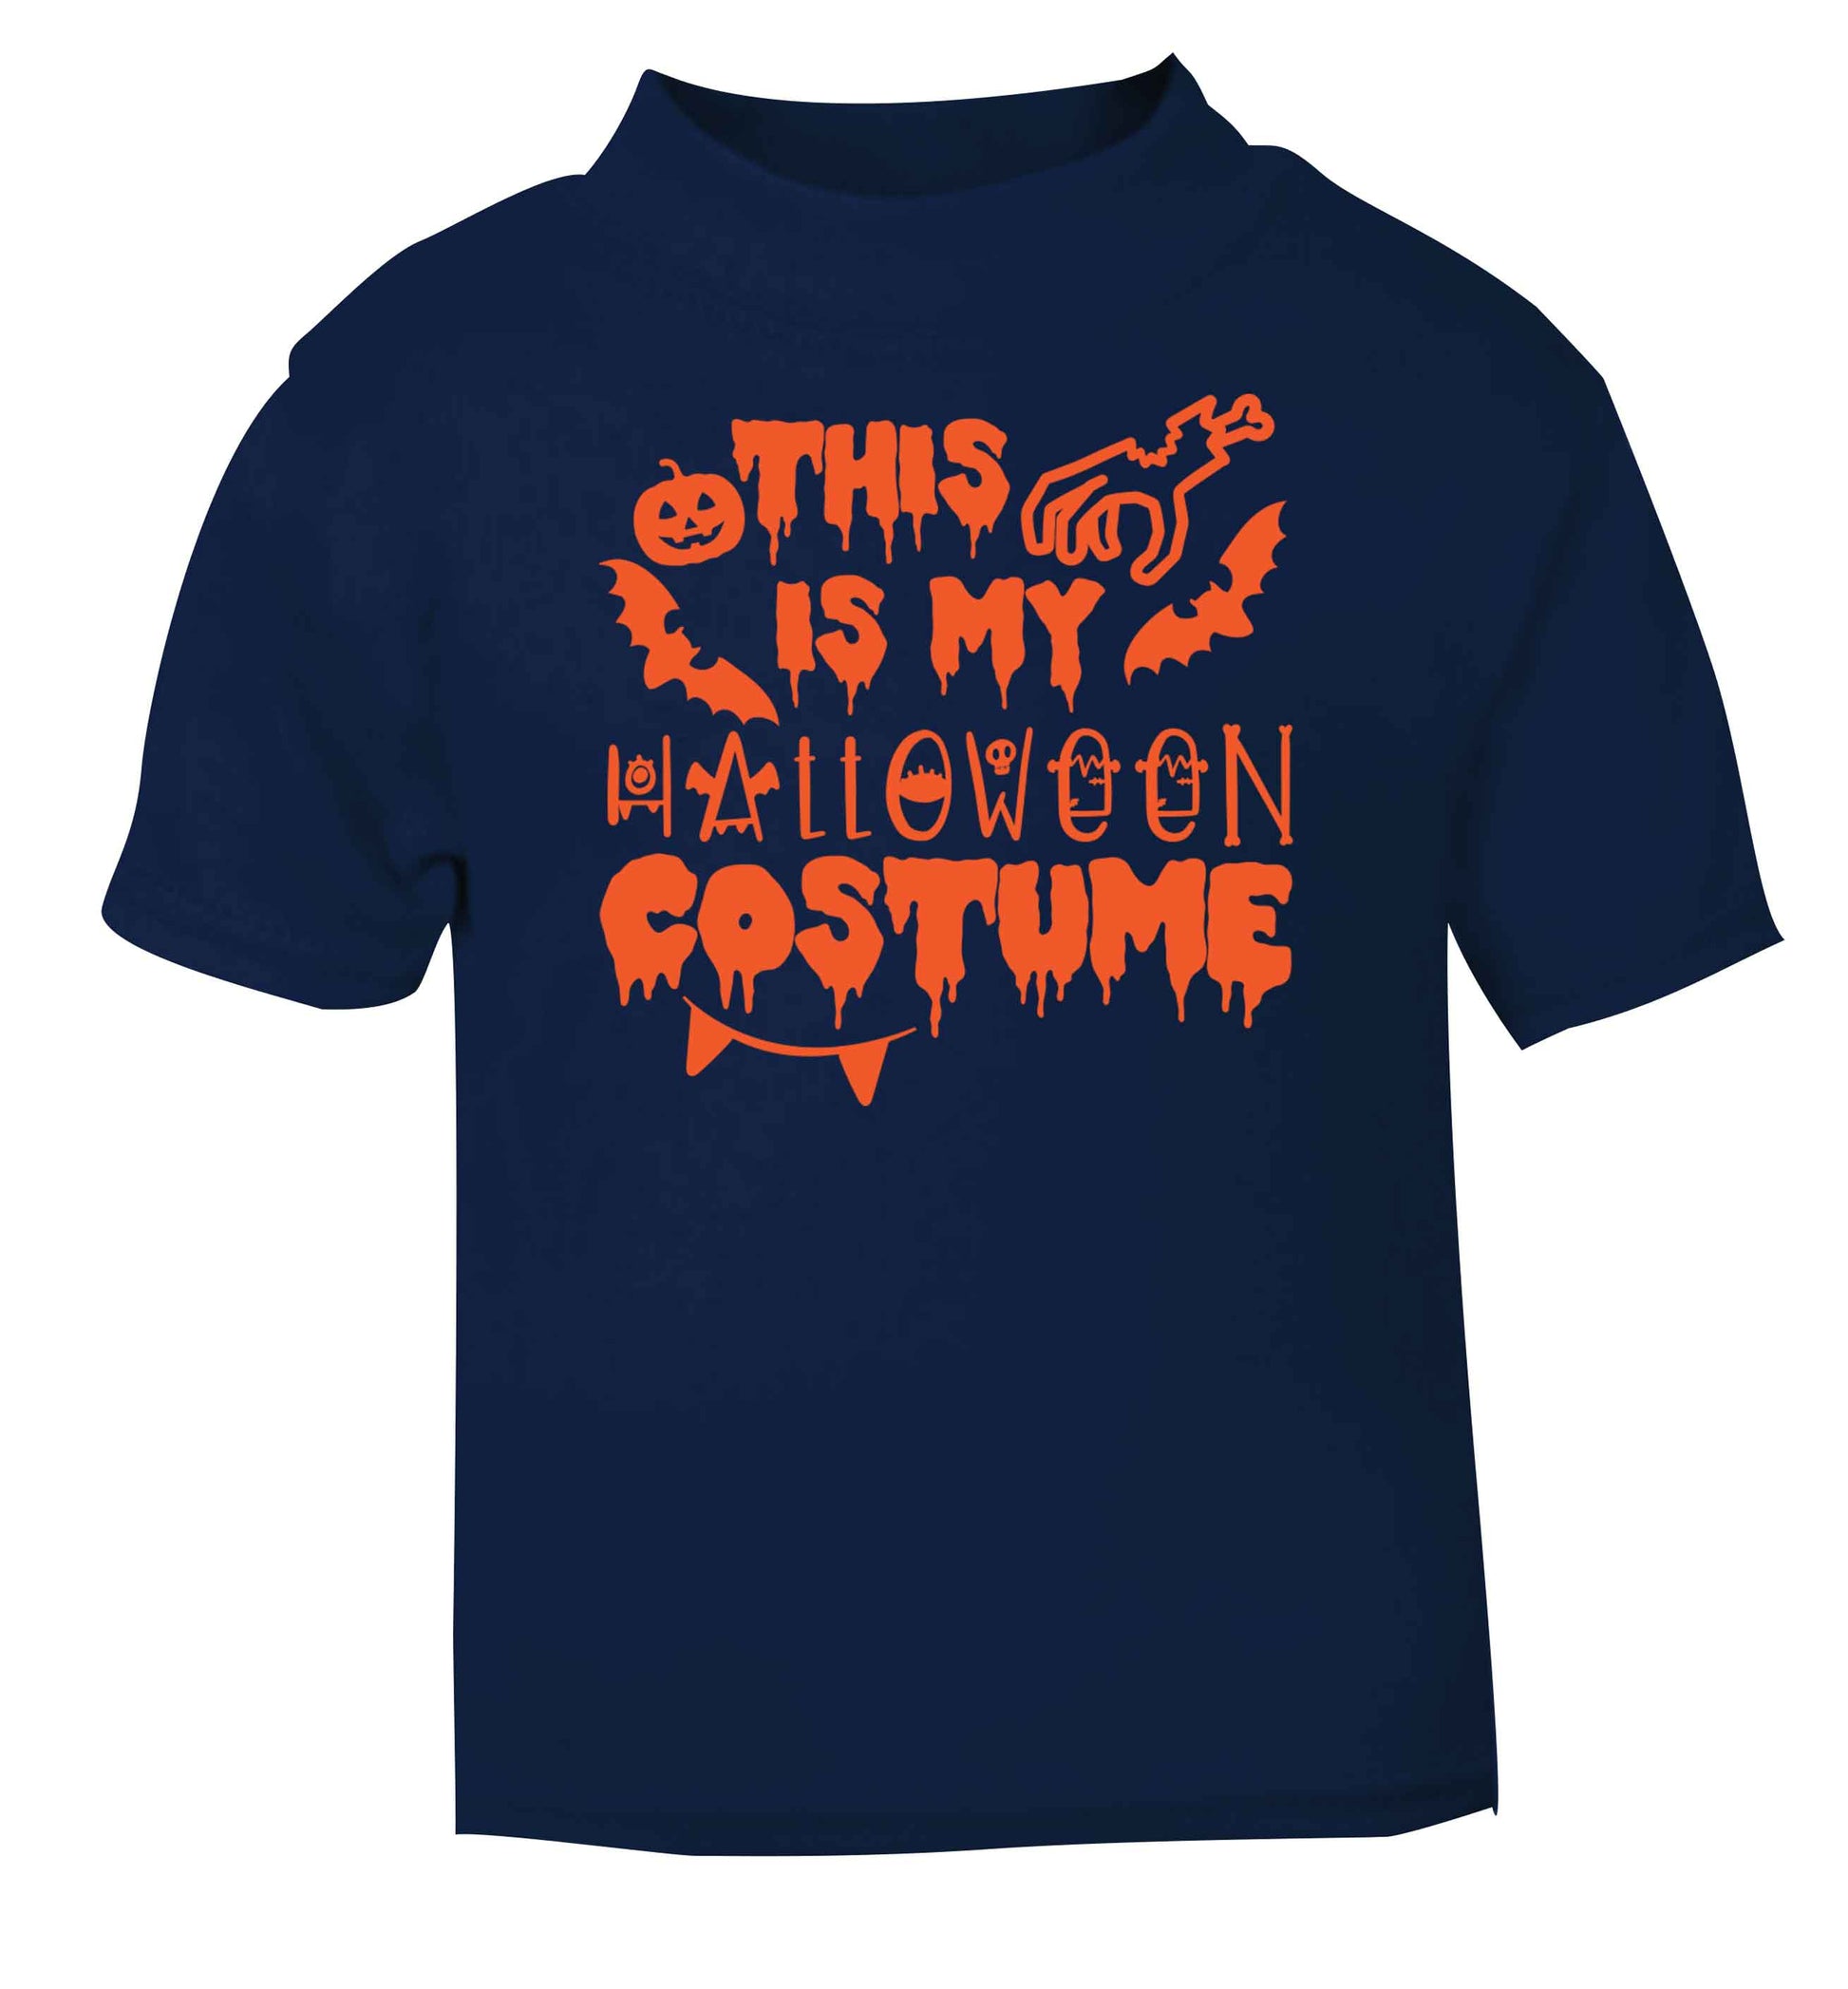 This is my halloween costume navy baby toddler Tshirt 2 Years